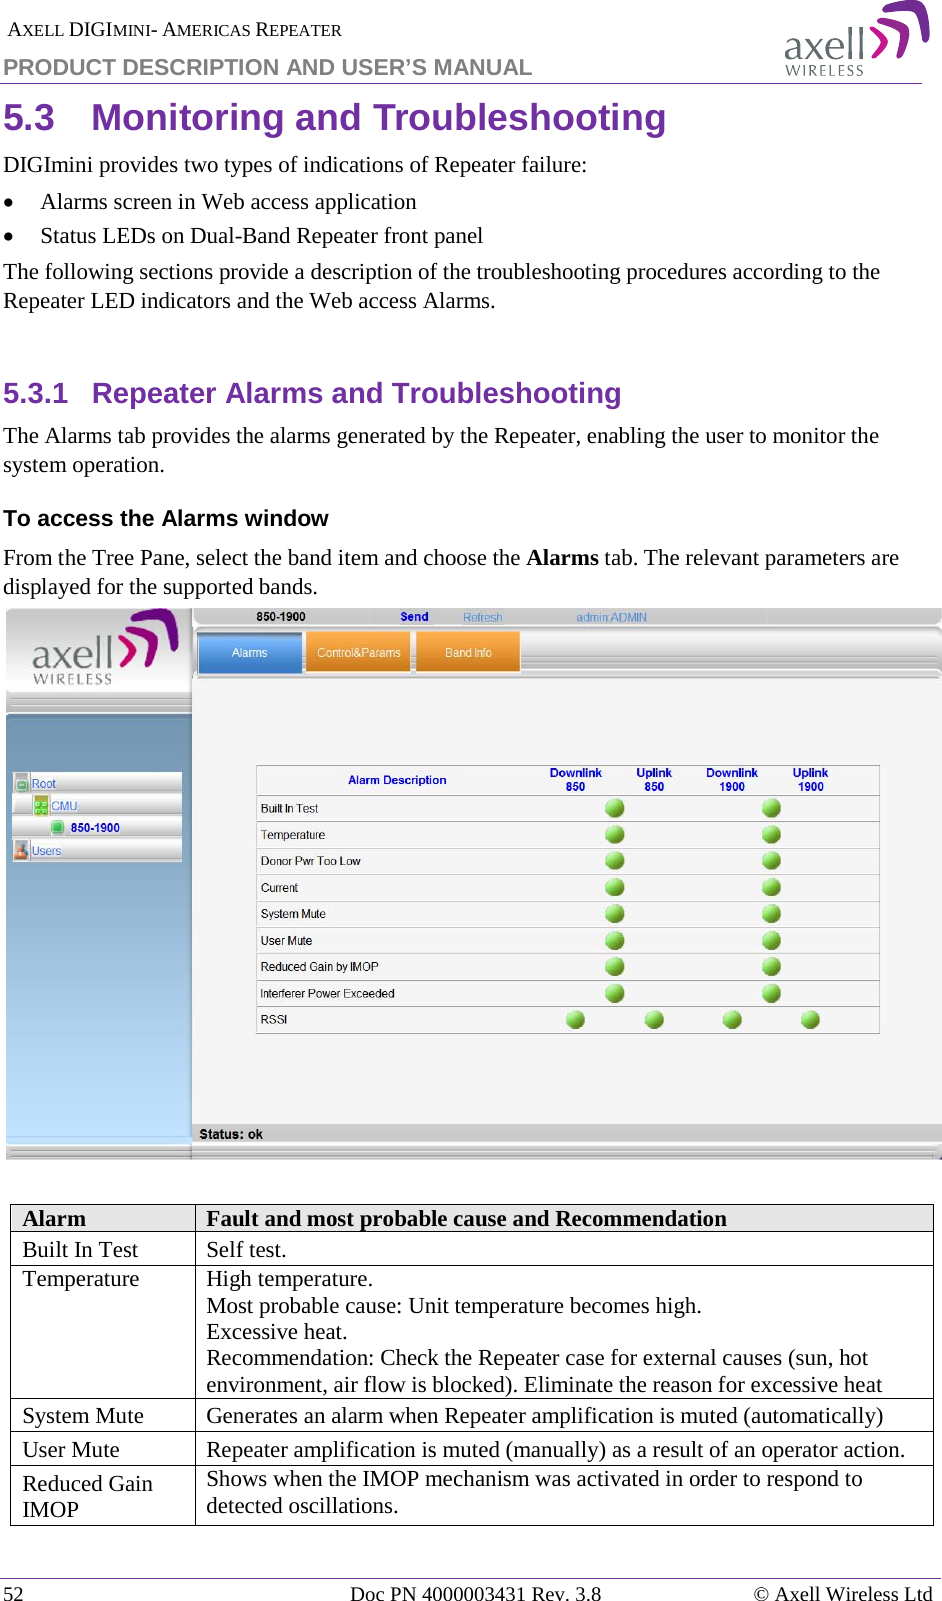  AXELL DIGIMINI- AMERICAS REPEATER PRODUCT DESCRIPTION AND USER’S MANUAL 52   Doc PN 4000003431 Rev. 3.8 © Axell Wireless Ltd 5.3  Monitoring and Troubleshooting DIGImini provides two types of indications of Repeater failure:  • Alarms screen in Web access application  • Status LEDs on Dual-Band Repeater front panel The following sections provide a description of the troubleshooting procedures according to the Repeater LED indicators and the Web access Alarms.  5.3.1  Repeater Alarms and Troubleshooting The Alarms tab provides the alarms generated by the Repeater, enabling the user to monitor the system operation. To access the Alarms window From the Tree Pane, select the band item and choose the Alarms tab. The relevant parameters are displayed for the supported bands.   Alarm Fault and most probable cause and Recommendation Built In Test  Self test. Temperature High temperature. Most probable cause: Unit temperature becomes high.  Excessive heat. Recommendation: Check the Repeater case for external causes (sun, hot environment, air flow is blocked). Eliminate the reason for excessive heat System Mute Generates an alarm when Repeater amplification is muted (automatically) User Mute Repeater amplification is muted (manually) as a result of an operator action. Reduced Gain IMOP Shows when the IMOP mechanism was activated in order to respond to detected oscillations.  